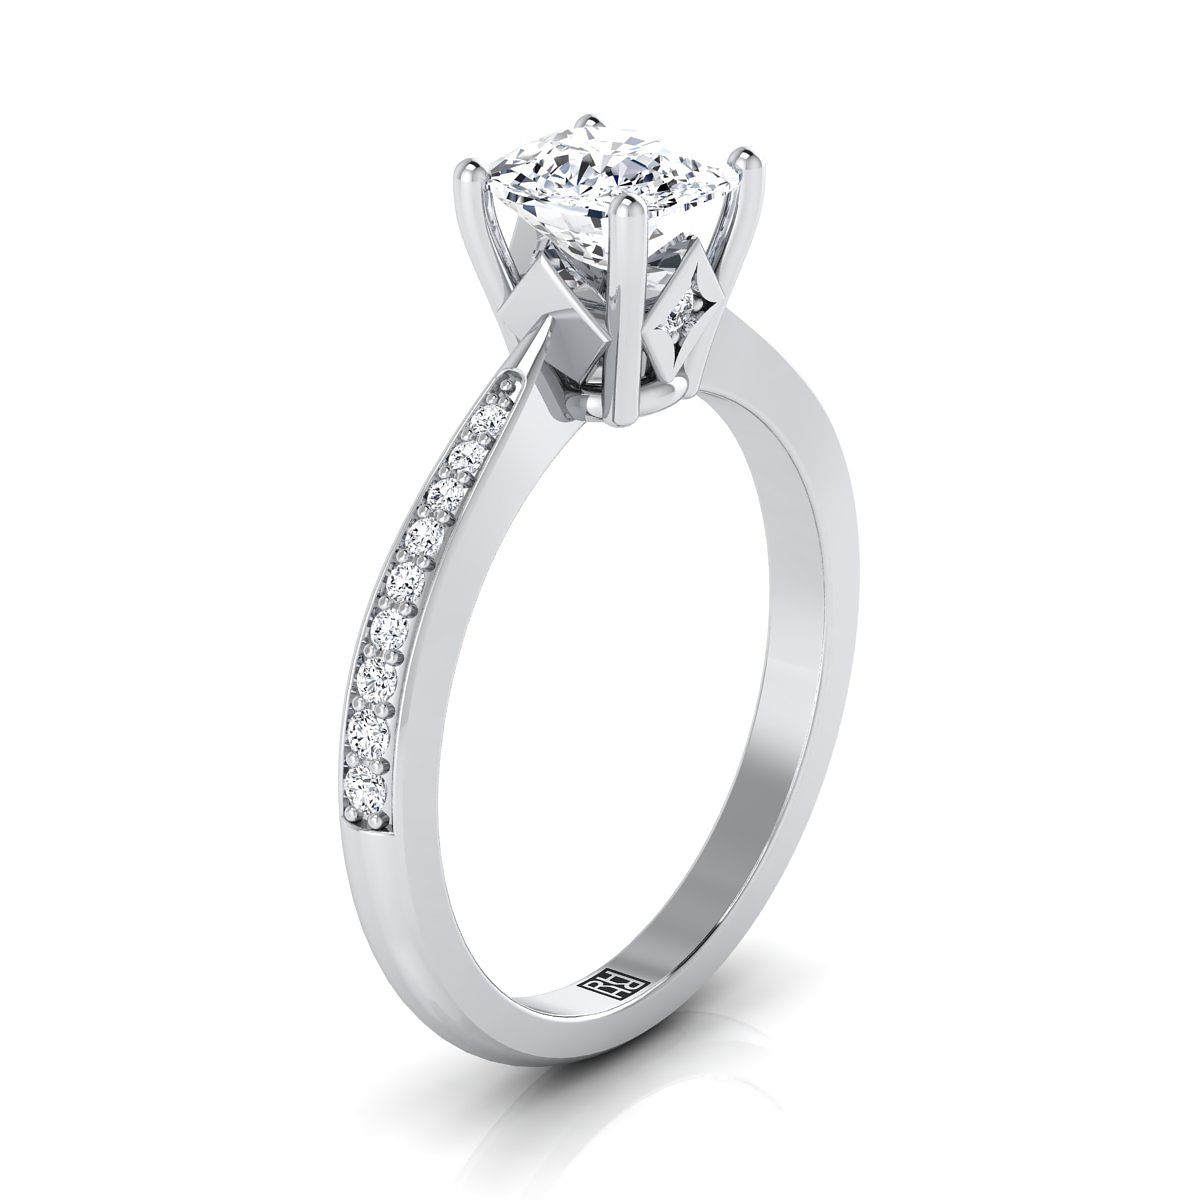 18K White Gold Cushion Diamond Tapered Pave Engagement Ring -1/8ctw